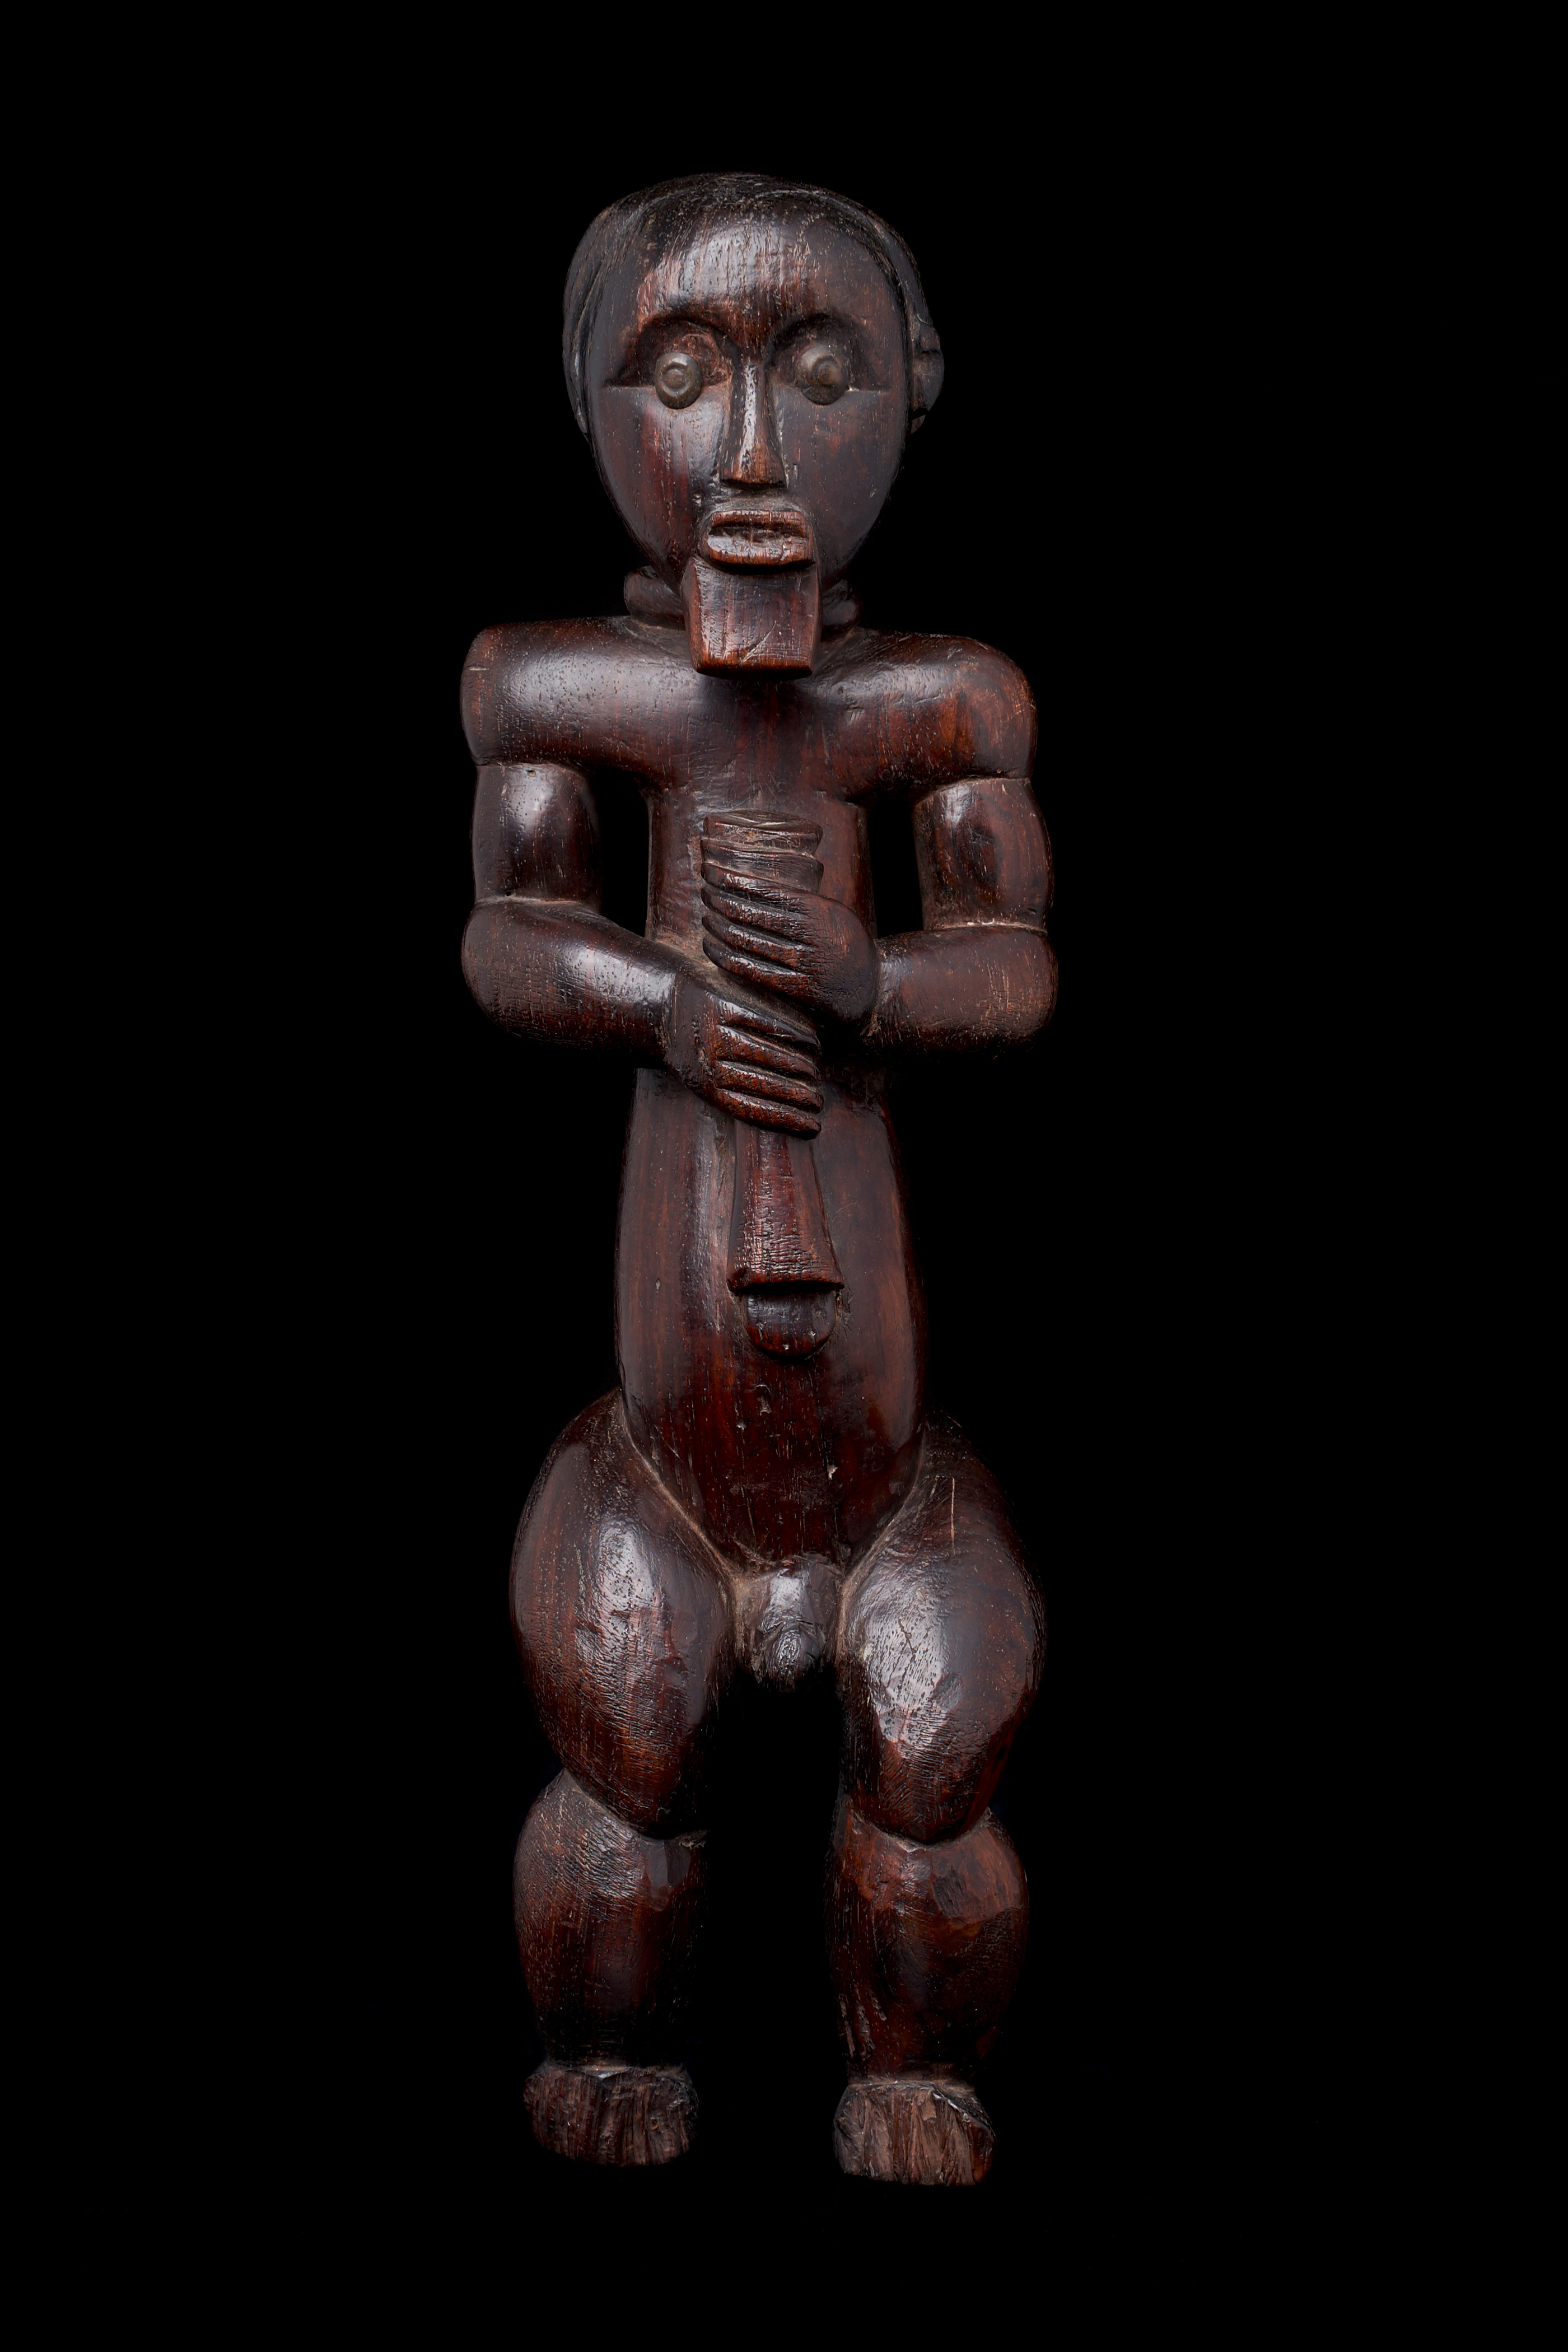 Rare and Important Reliquary guardian figure - ‘Byeri’ - Fang People, Gabon M31 - (Price on request).